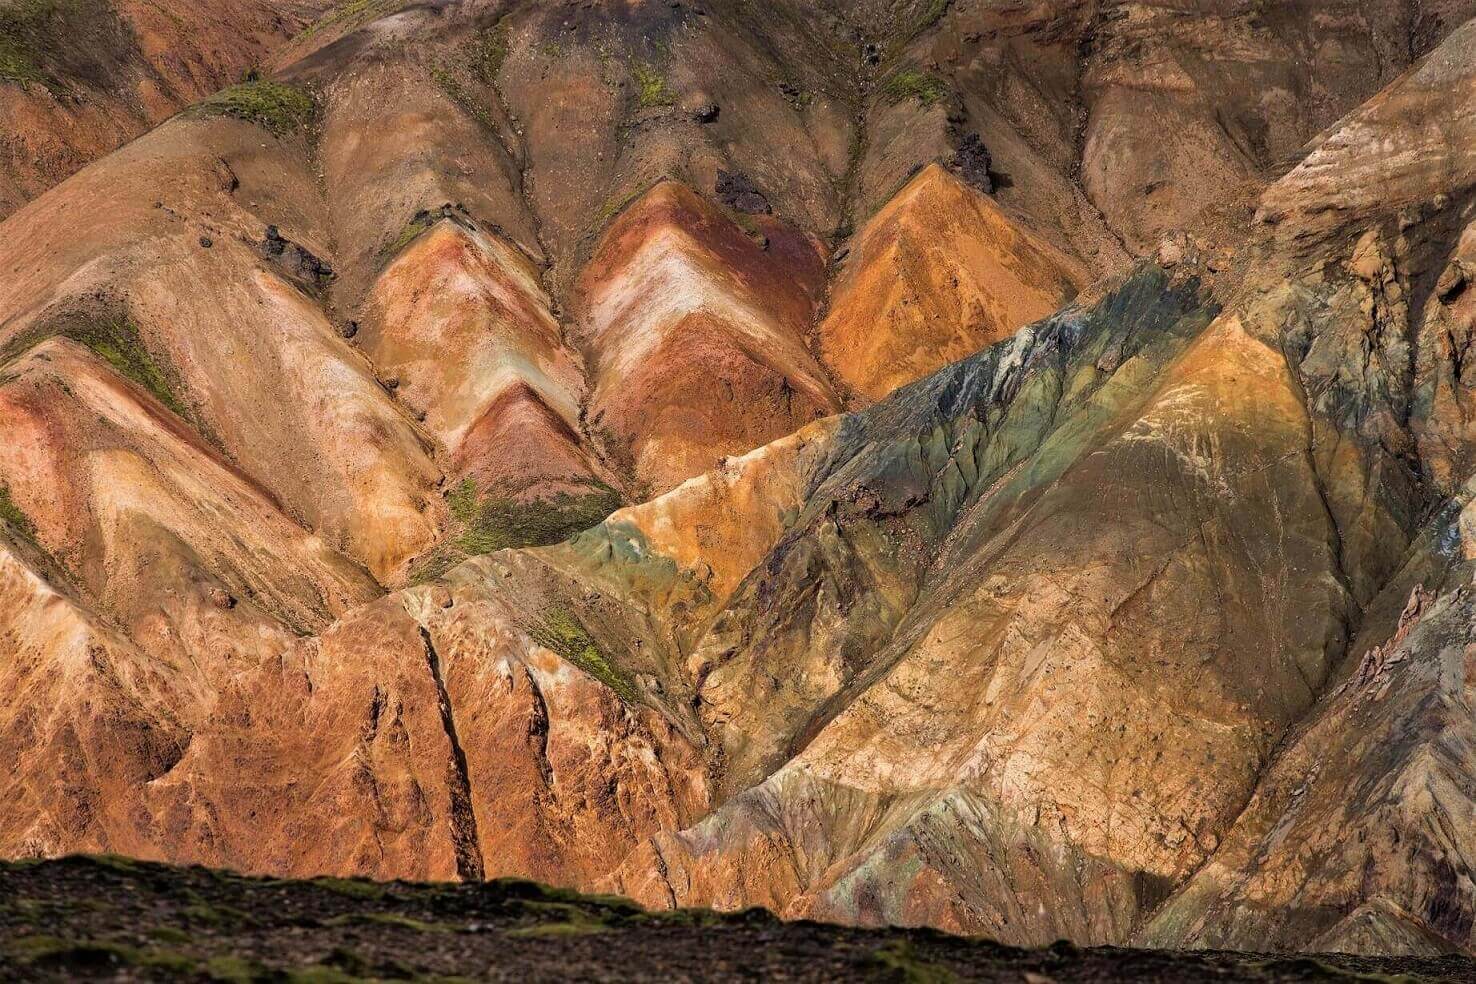 See the incredible interior of the painted mountains in Iceland at Landmannalaugar